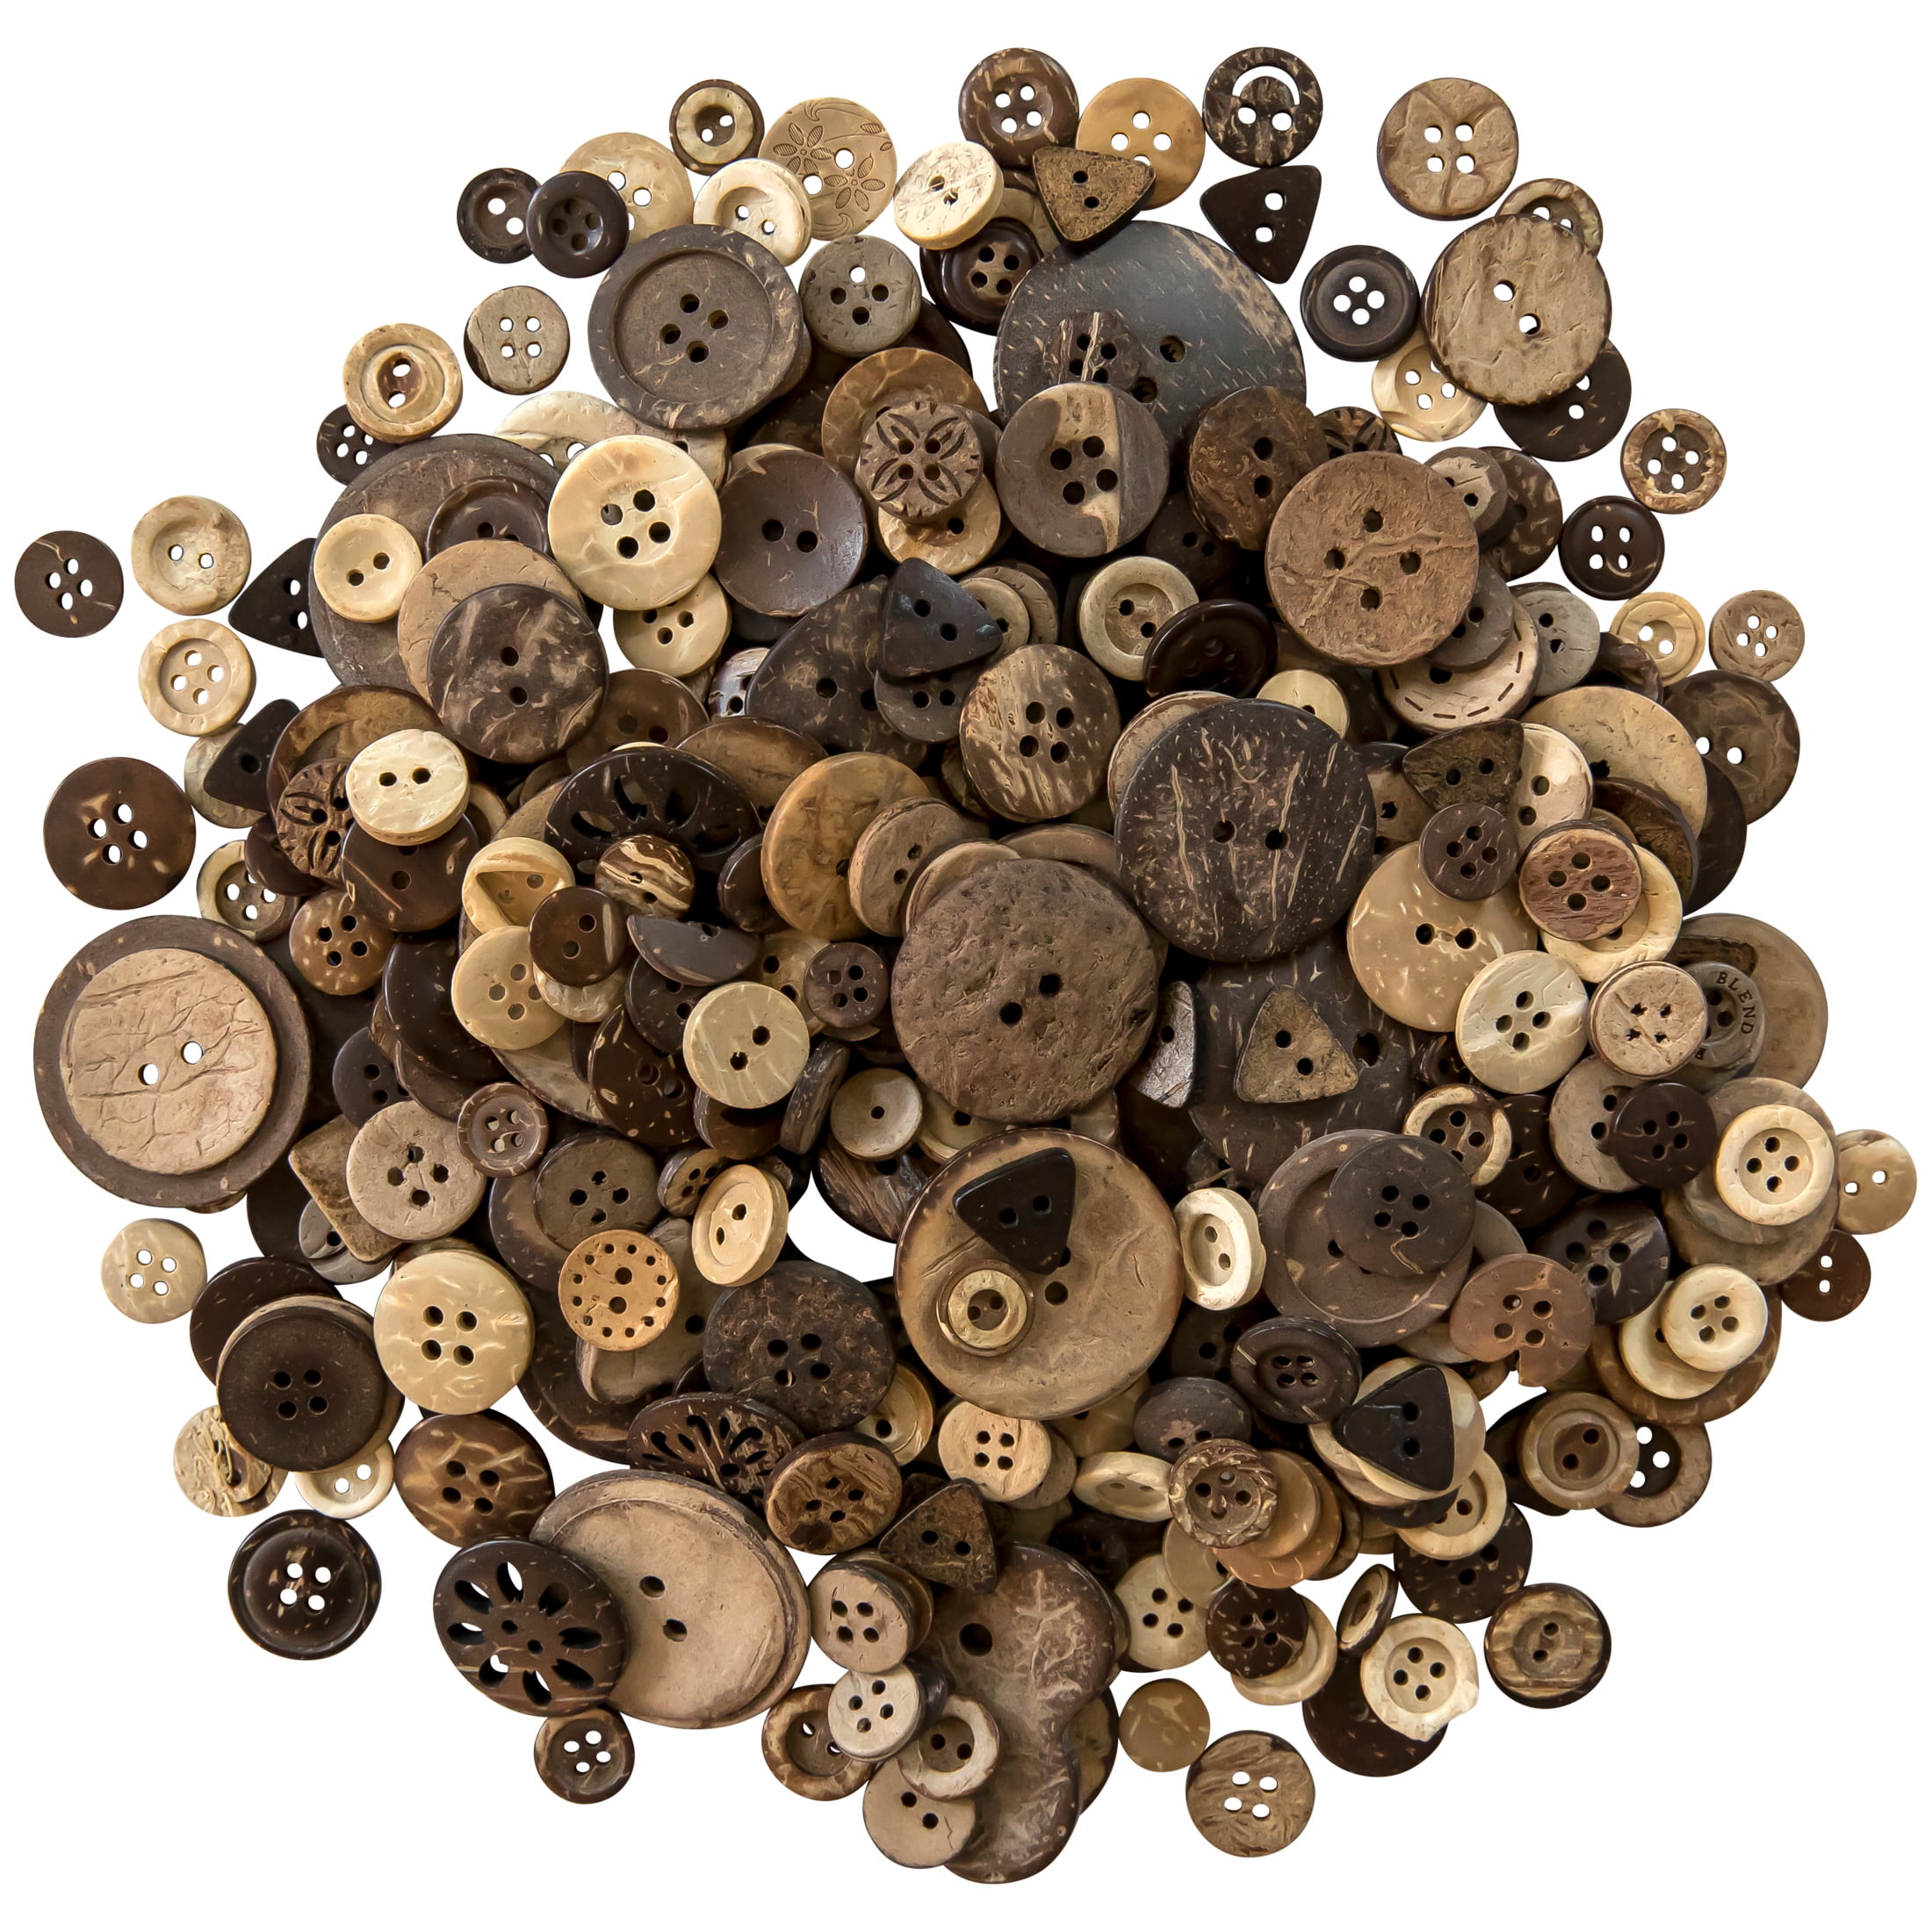 100Pcs Natural Coconut Buttons for Sewing, Round Brown Buttons, 2 Holes,  22mm, COCO011, - AliExpress